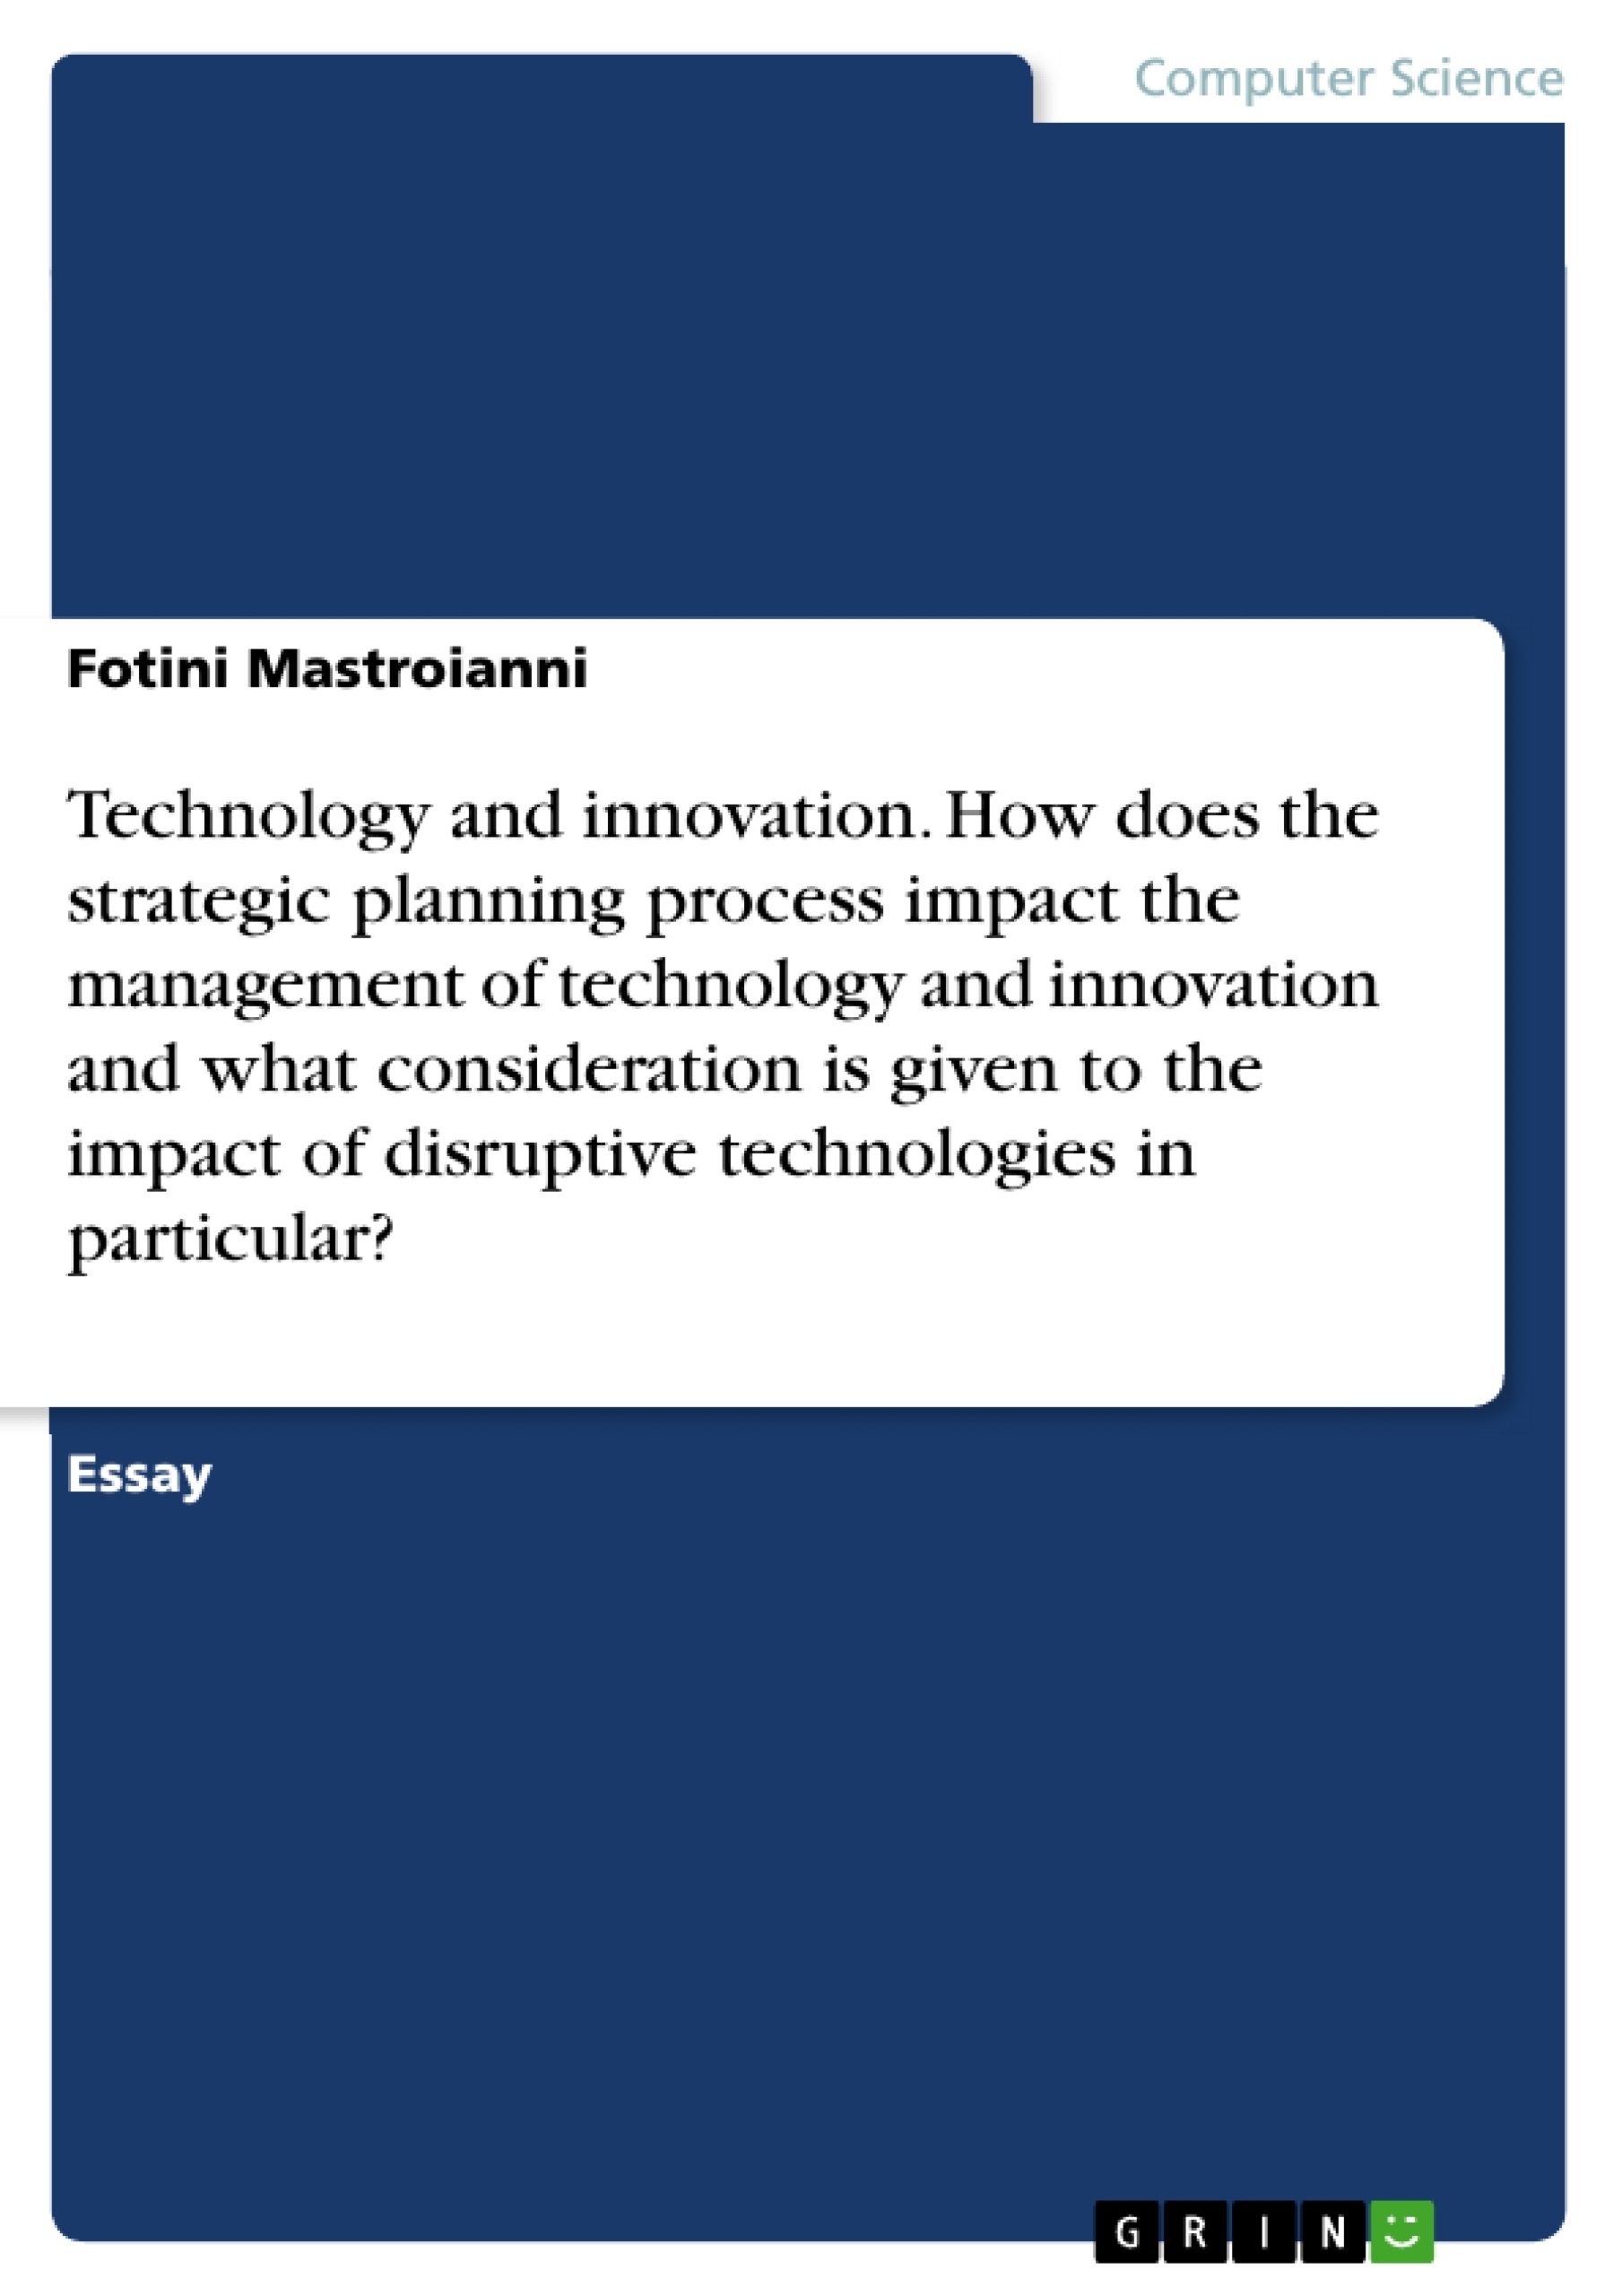 Titre: Technology and innovation. How does the strategic planning process impact the management of technology and innovation and what consideration is given to the impact of disruptive technologies in particular?